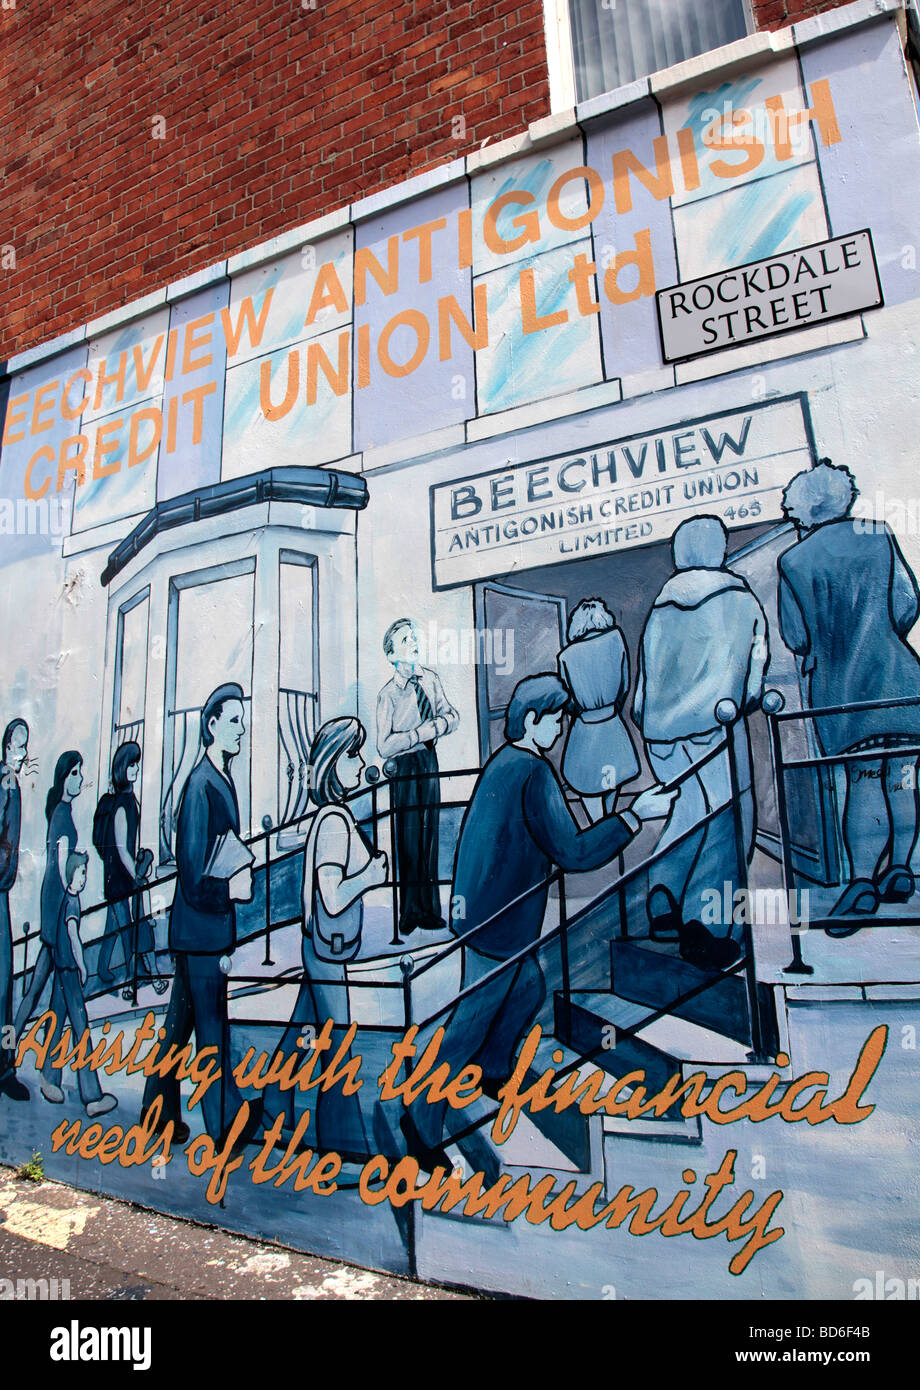 Belfast mural at the junction between Falls Road and Rockdale Street, featuring the Antigonish Credit Union. Stock Photo